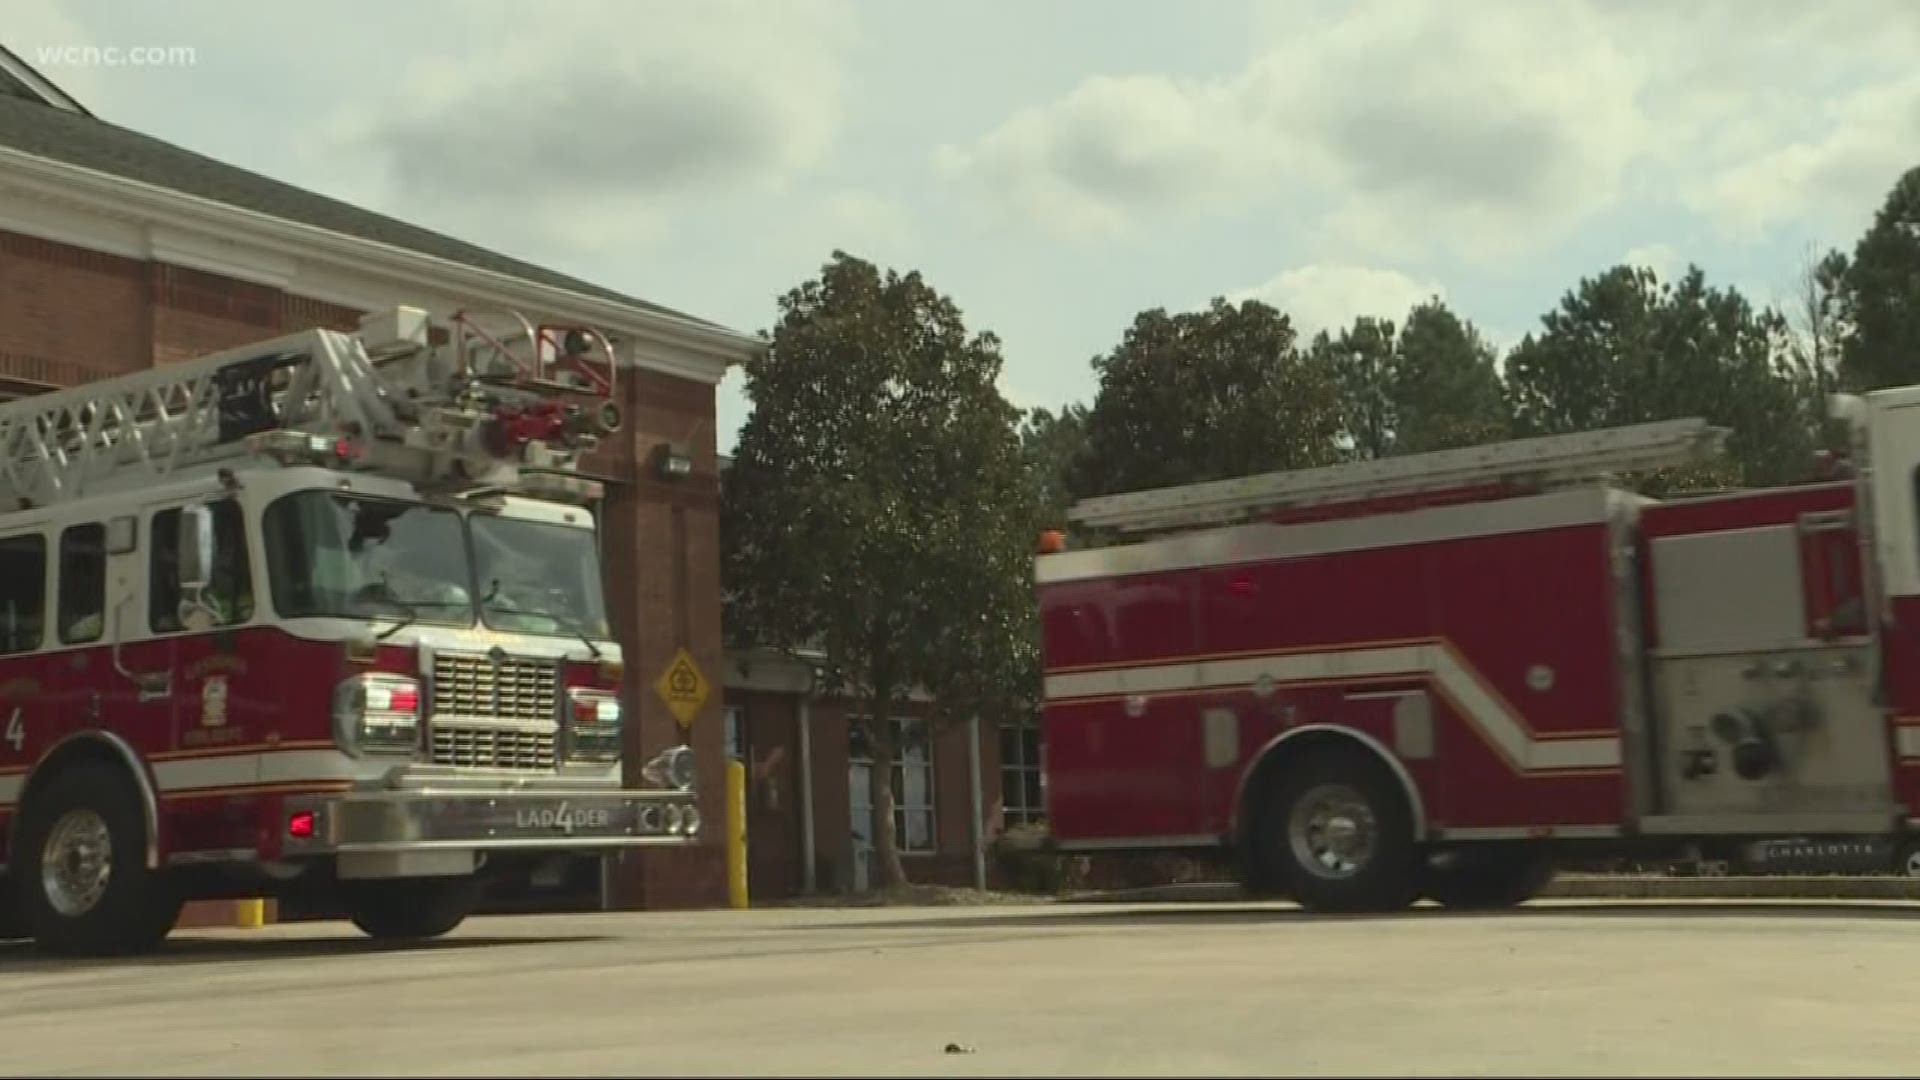 Gastonia firefighters discovered thousands of dollars worth of life-saving equipment were stolen from their fire truck this weekend.